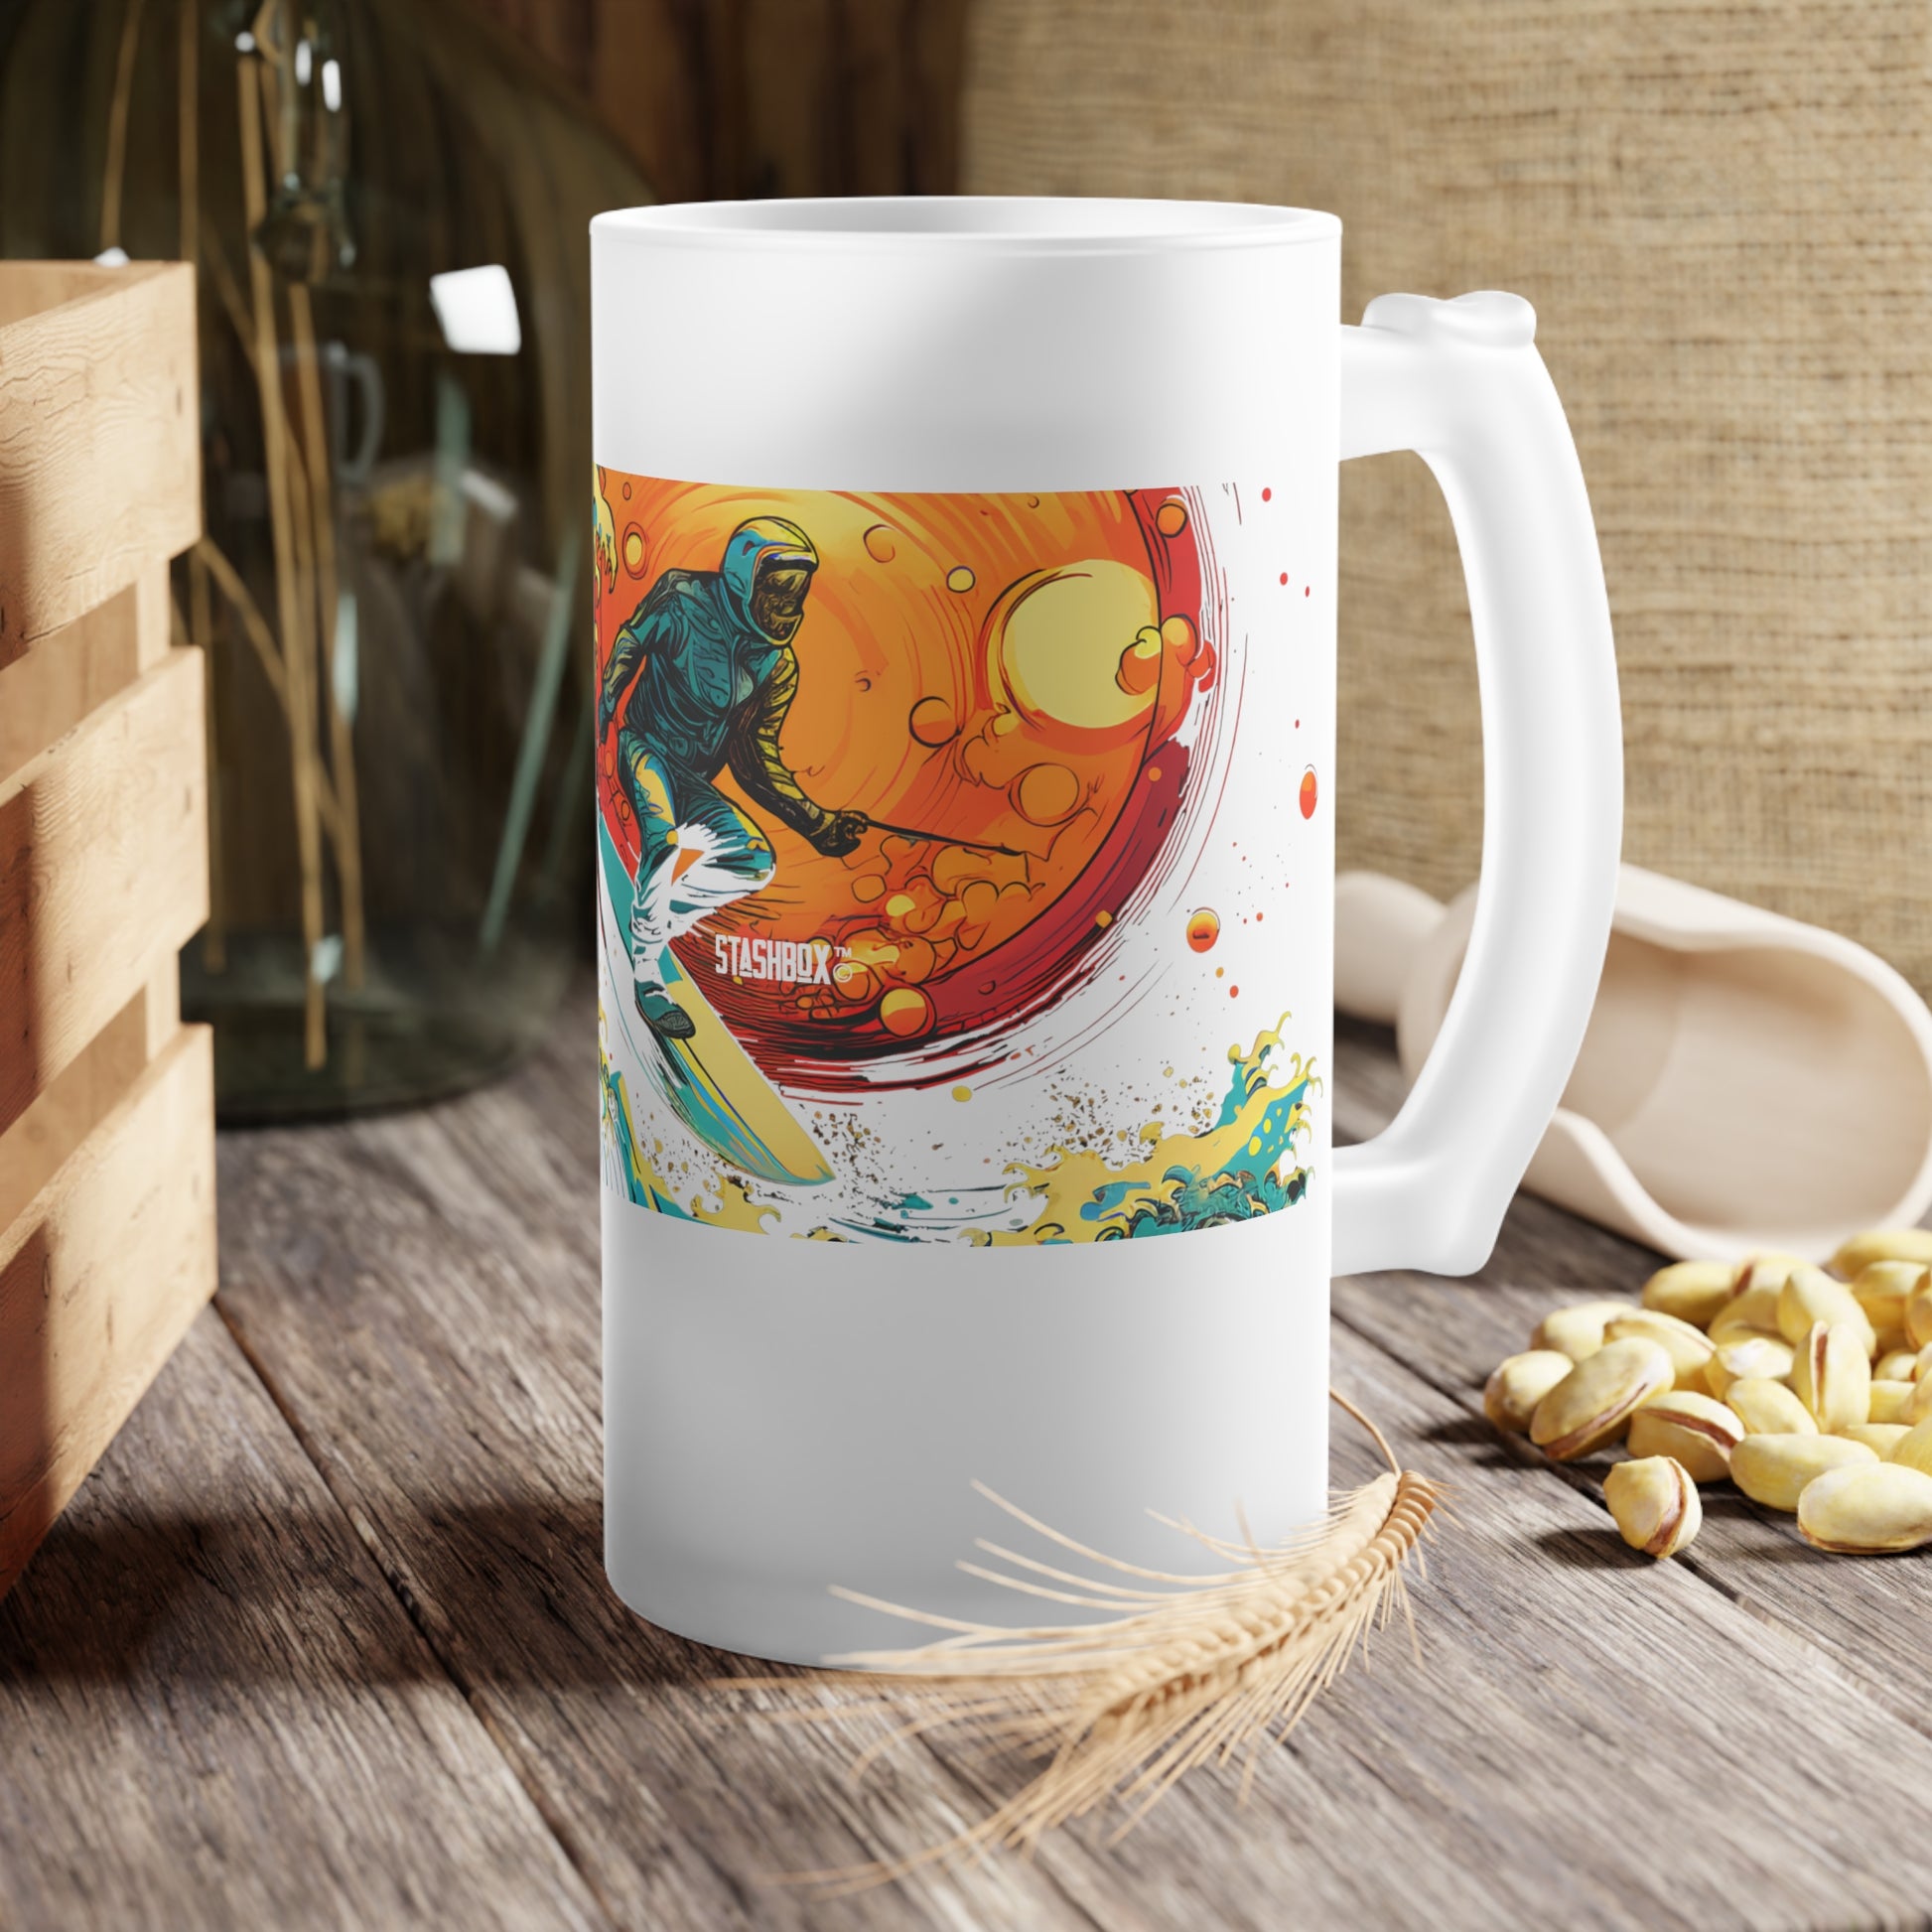 Explore the cosmic waves with our Surfing Astronaut Space Wave Frosted Glass Beer Mug. Waves Design #067 brings space and surfing together in a unique blend.